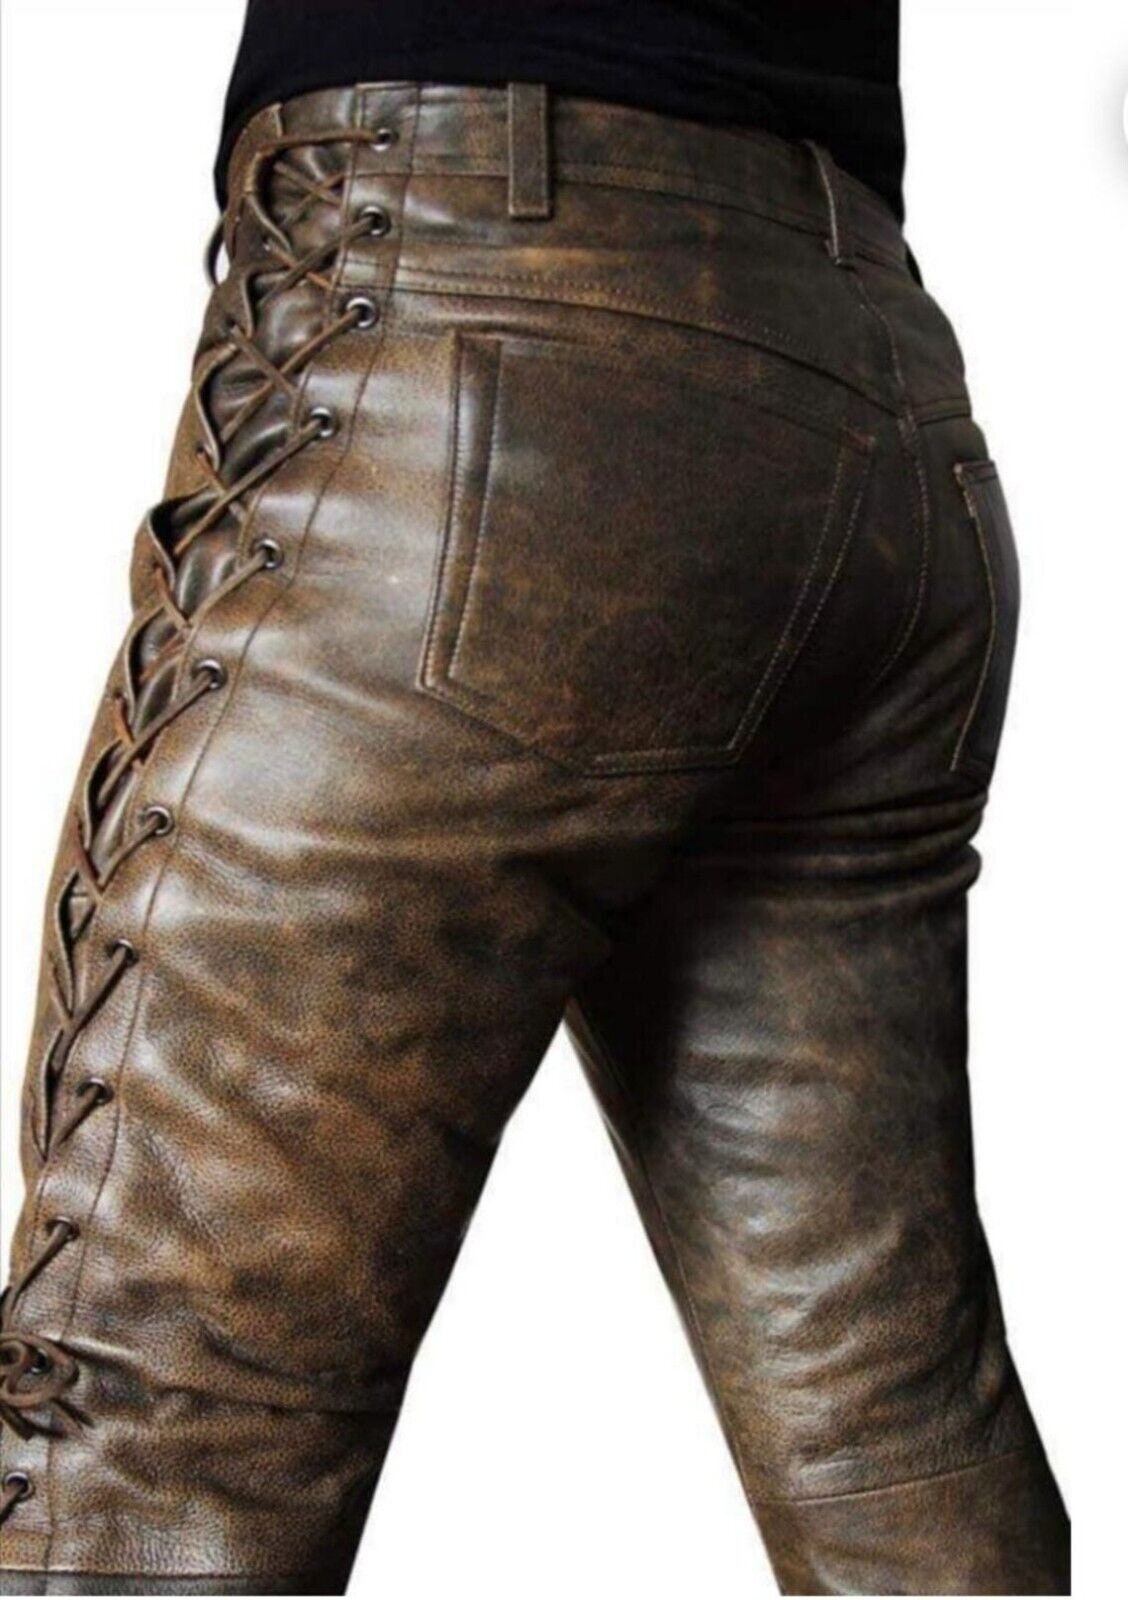 Lace up Brown Leather Pants for Men Side Lace Up - Etsy